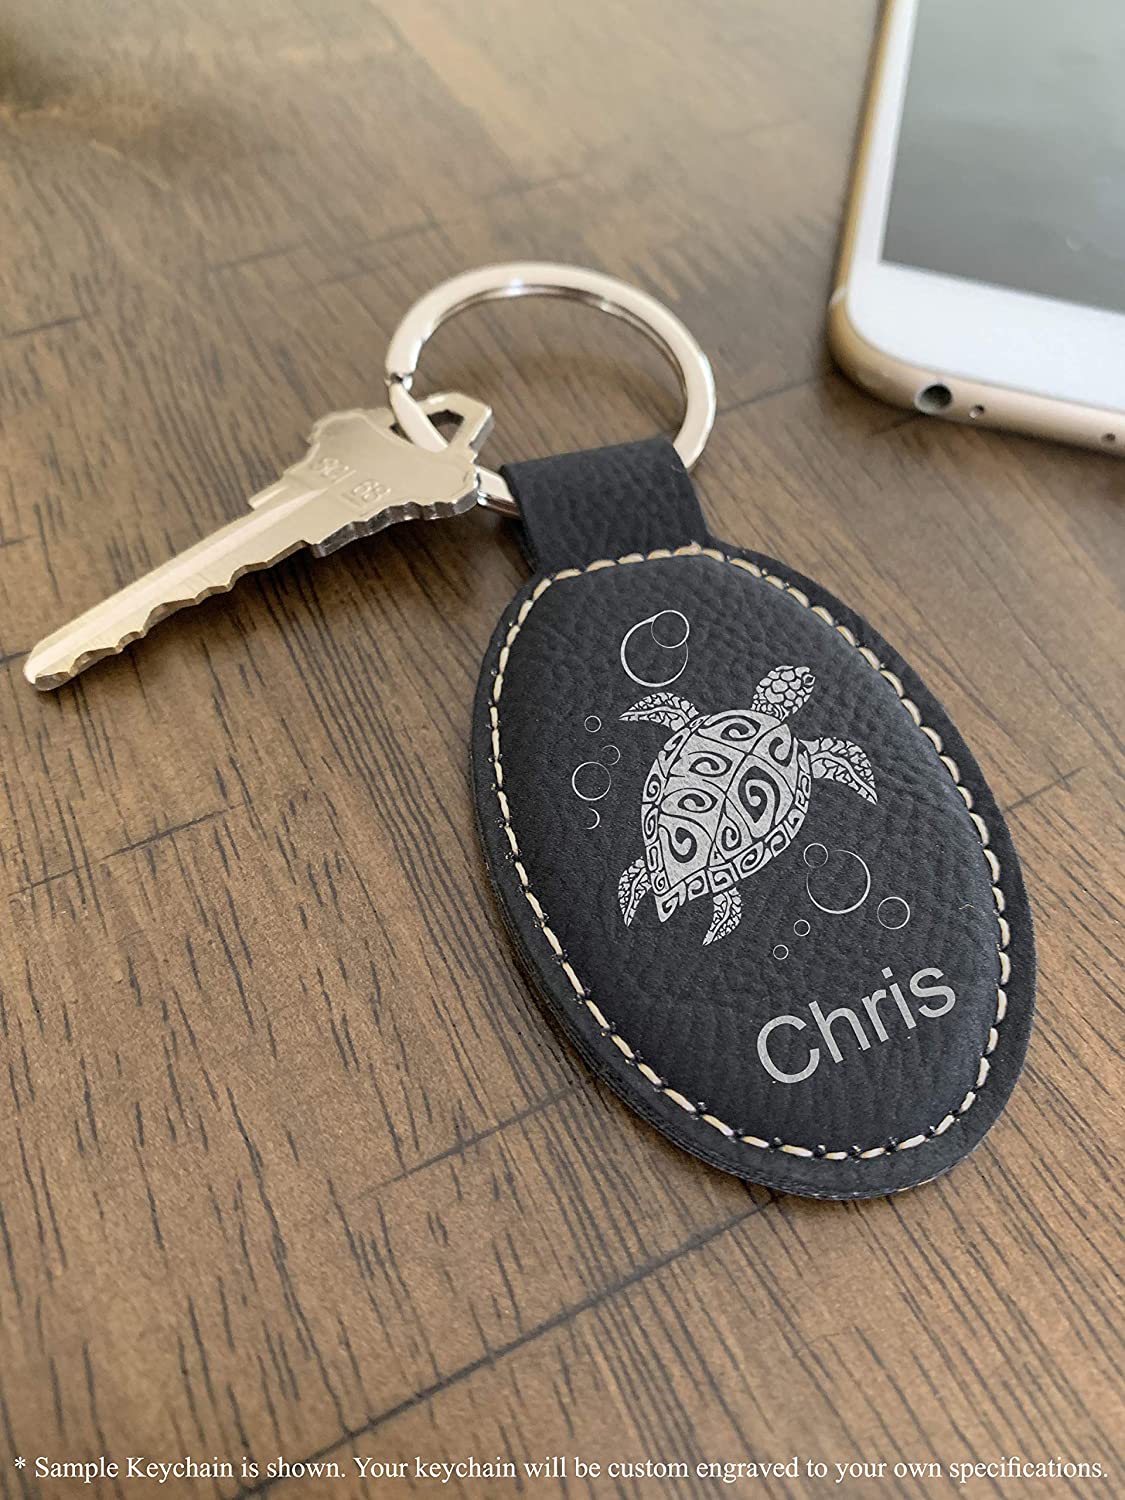 Faux Leather Oval Keychain, Musical Notes, Personalized Engraving Included